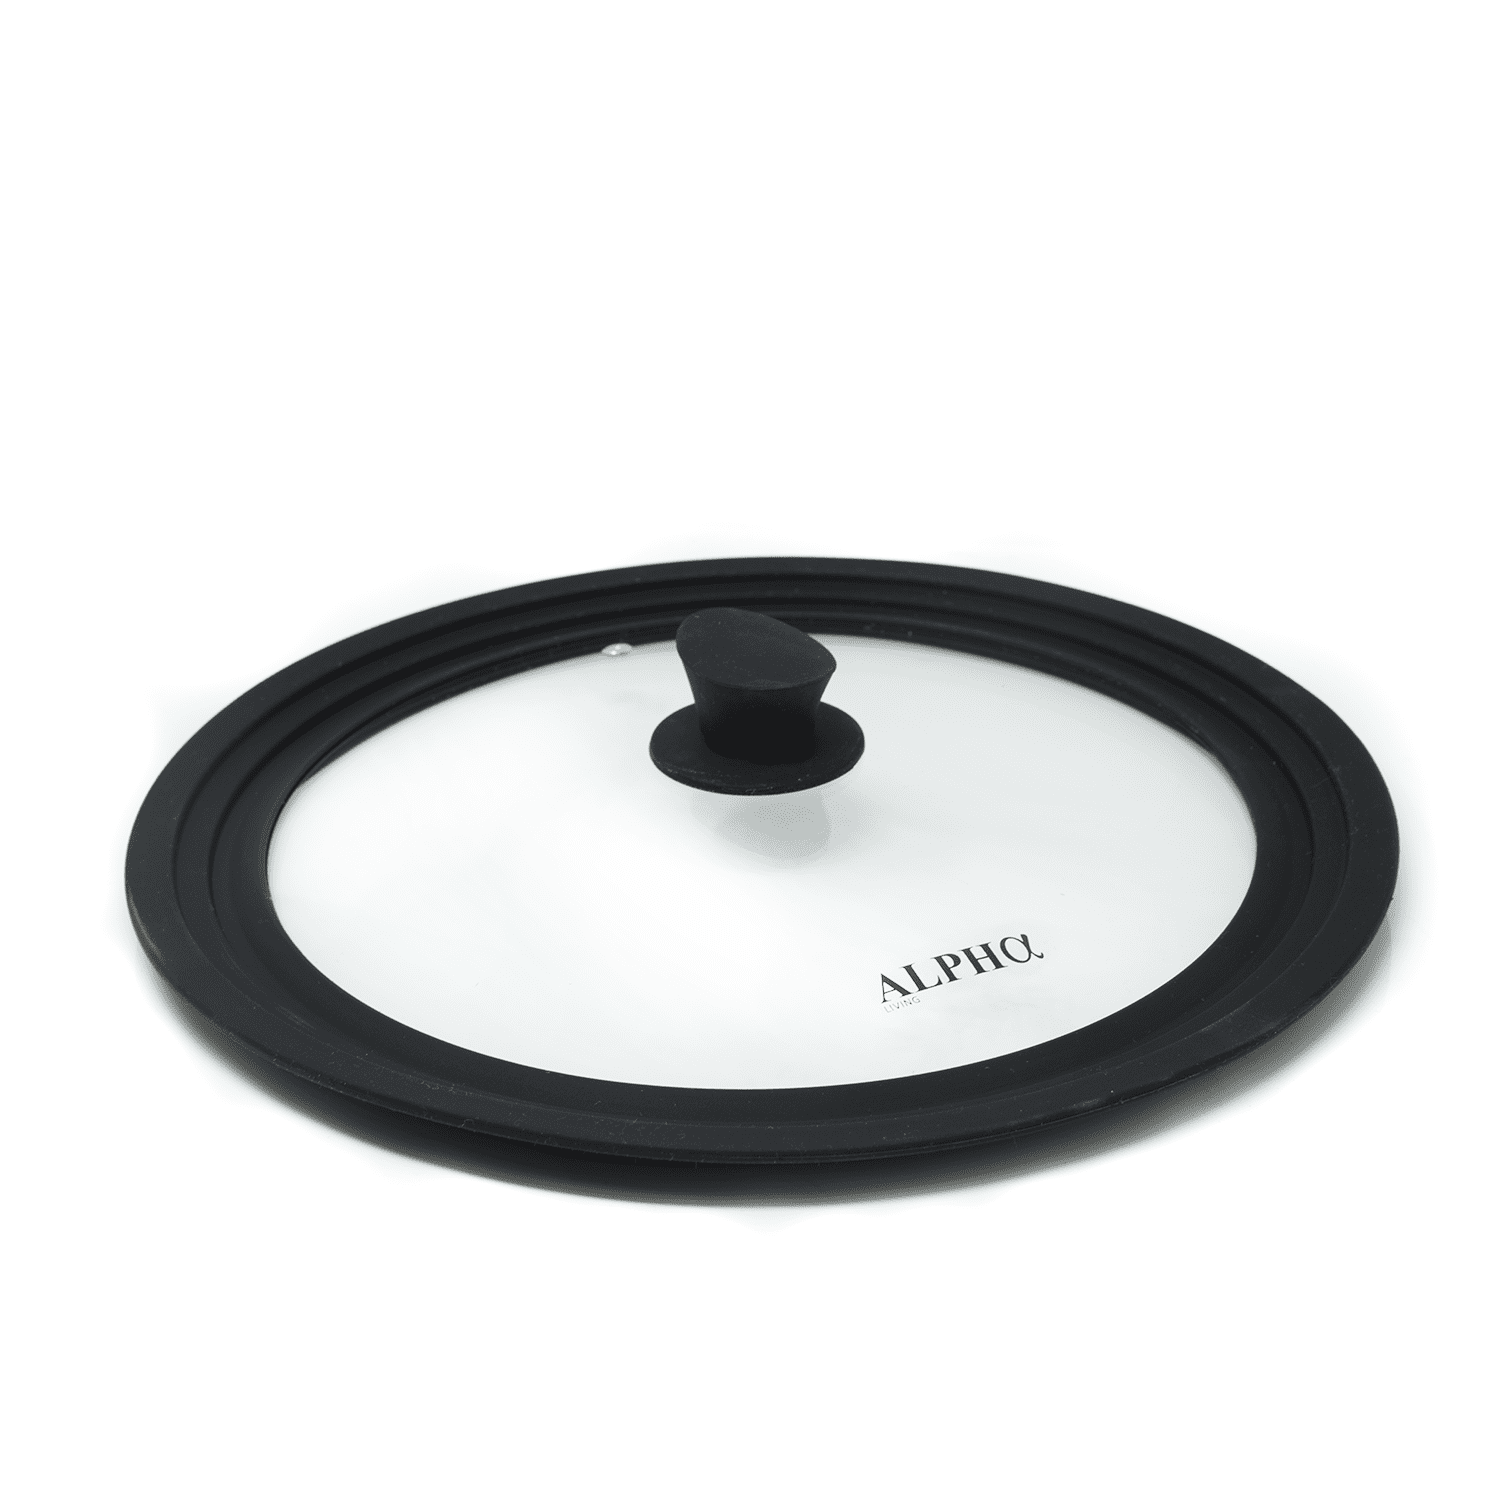  Universal Lid for Pots,Pans and Skillets - Tempered Glass with  Heat Resistant Silicone Rim Fits 8, 8.5 and 9.5 Diameter Cookware  ,Black: Home & Kitchen